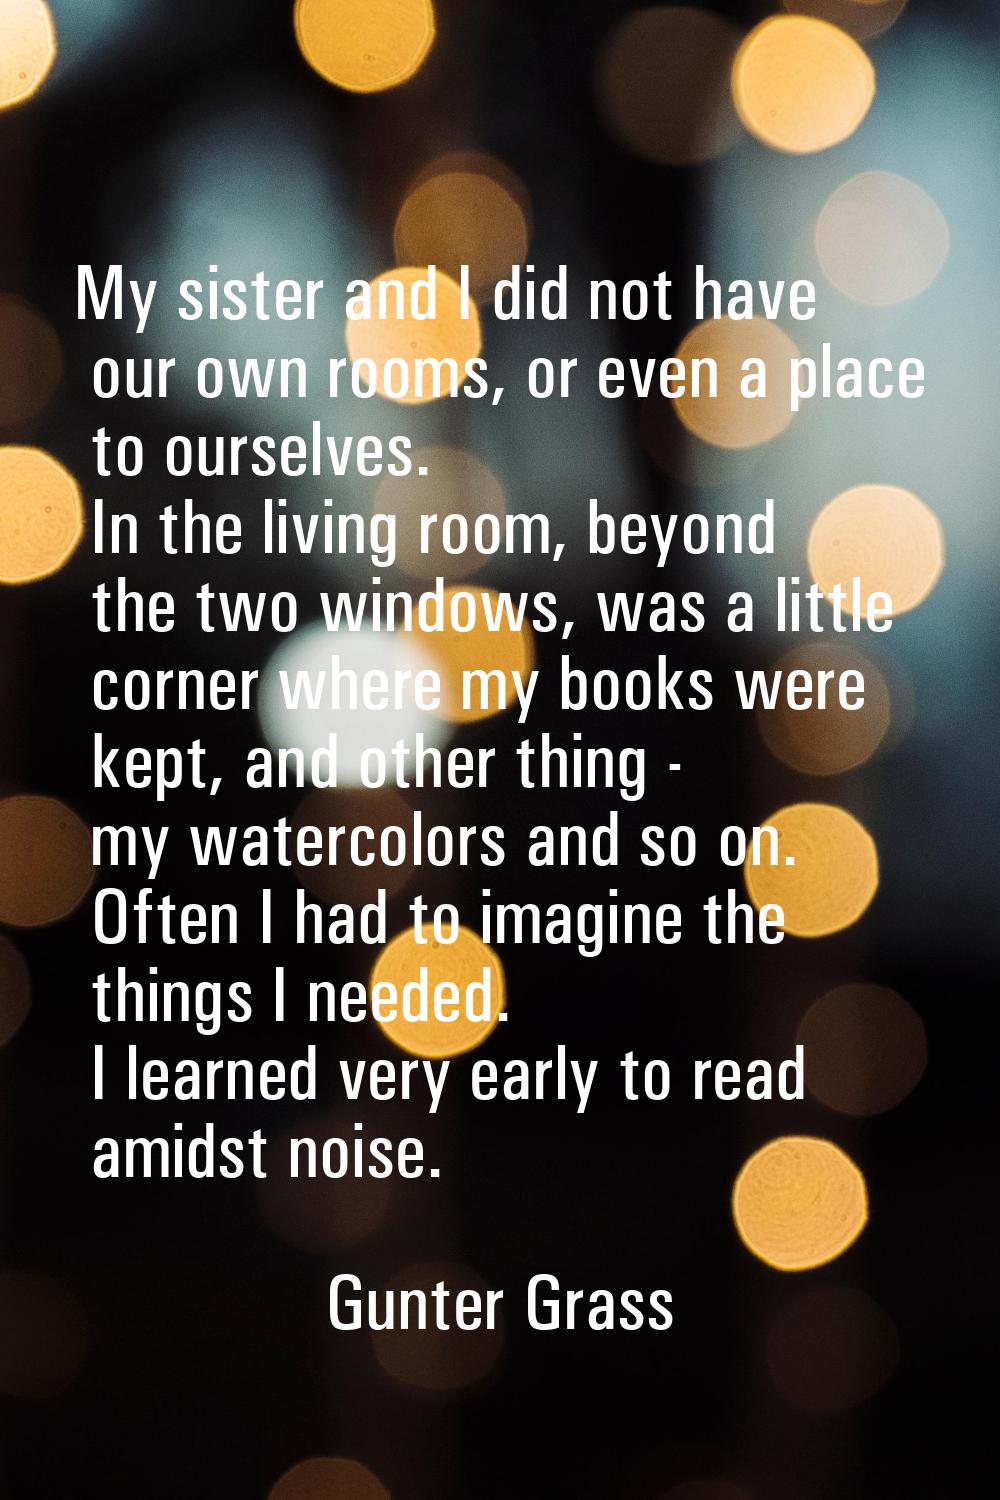 My sister and I did not have our own rooms, or even a place to ourselves. In the living room, beyon